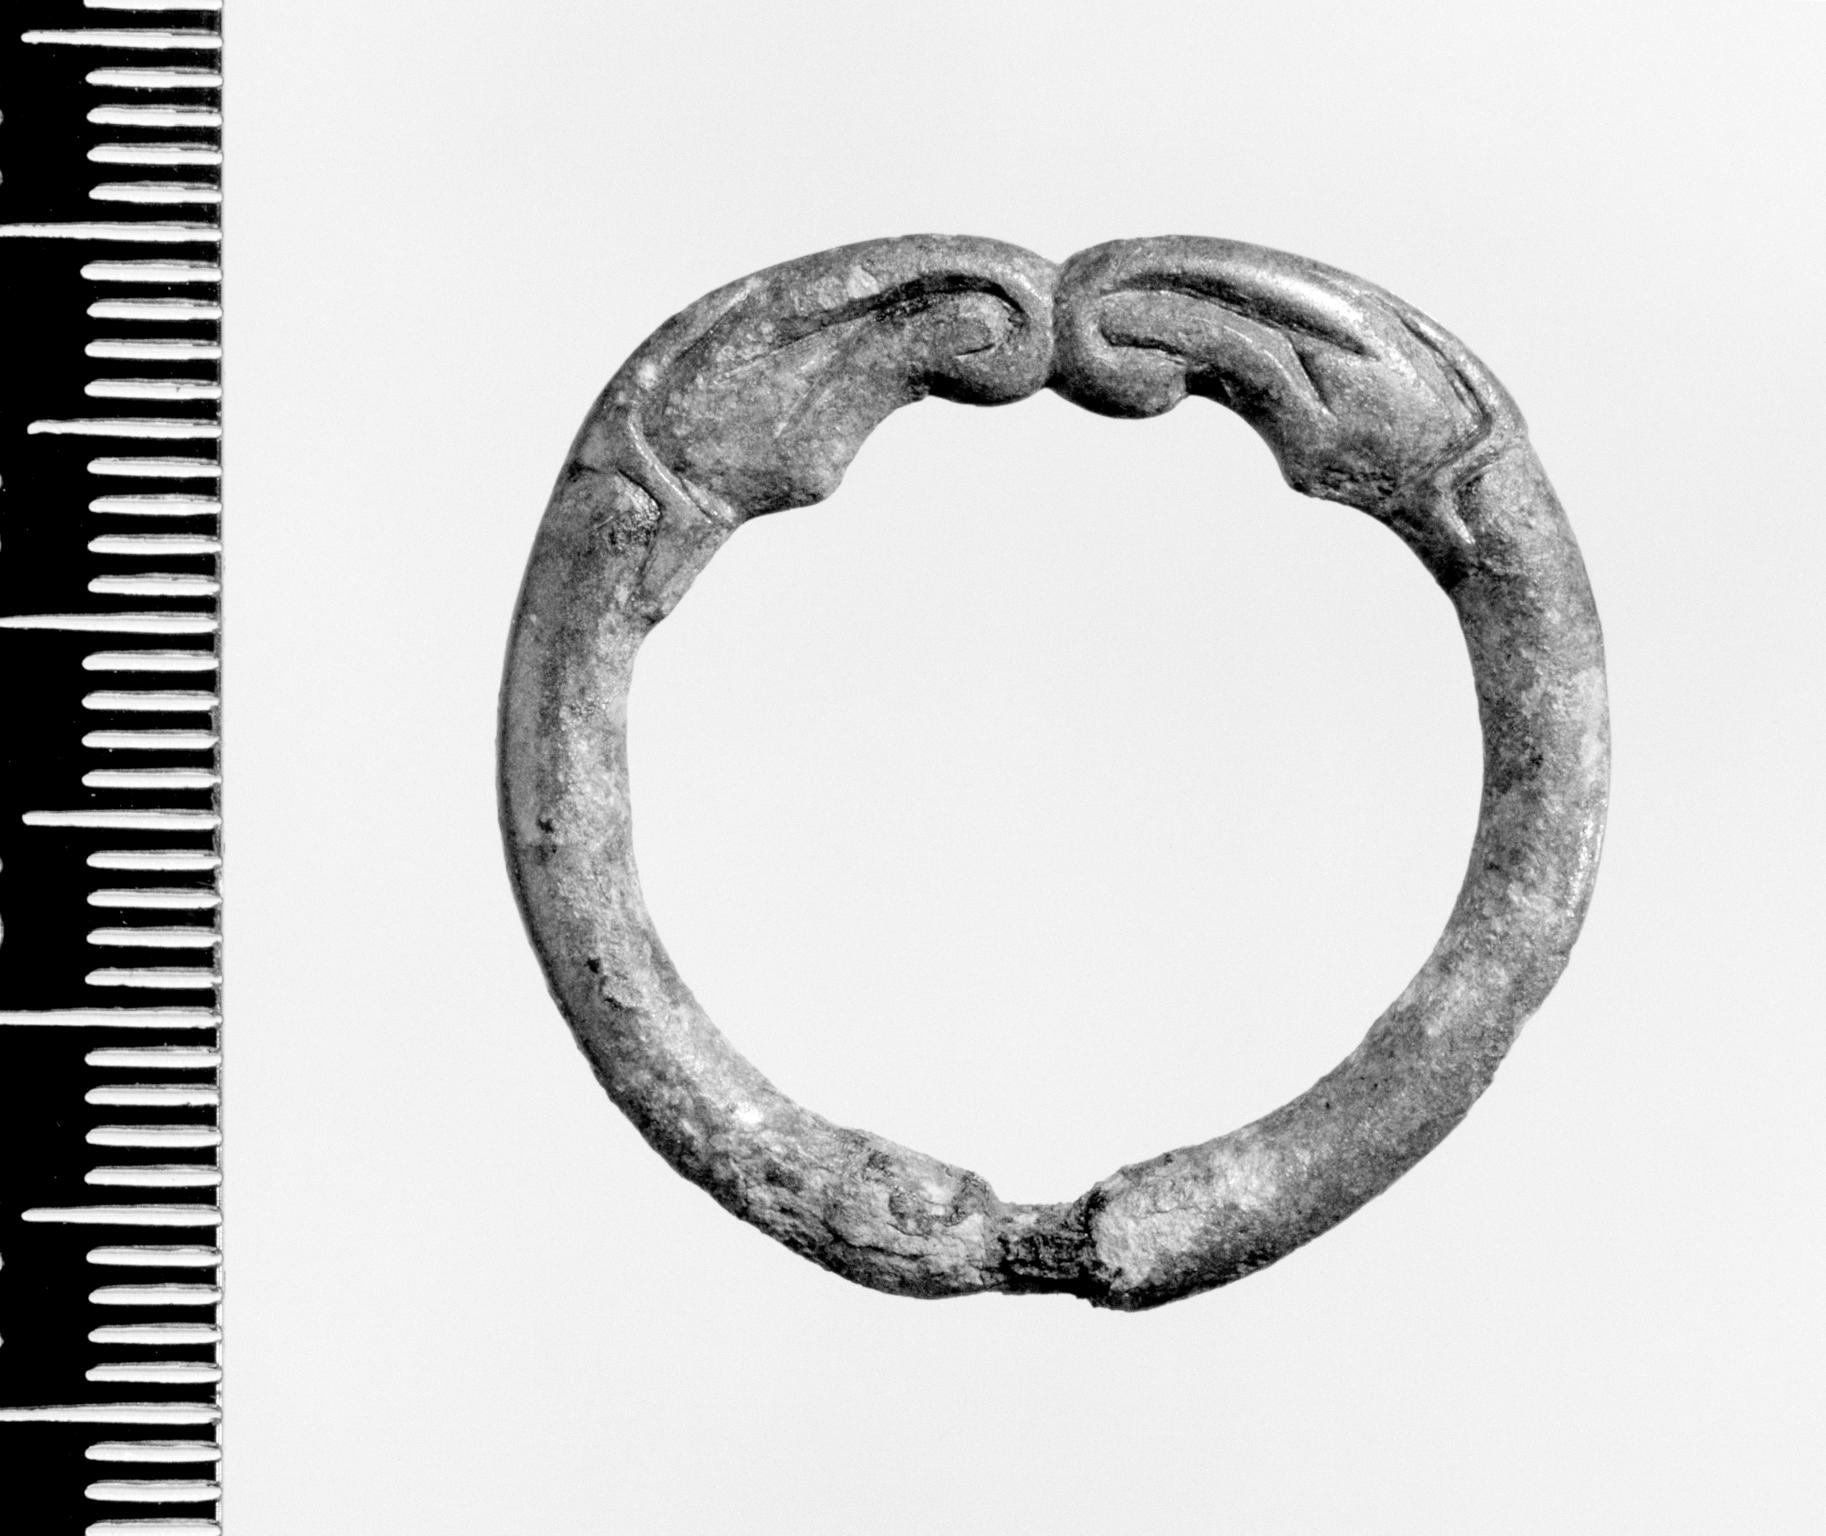 Early Medieval copper alloy brooch